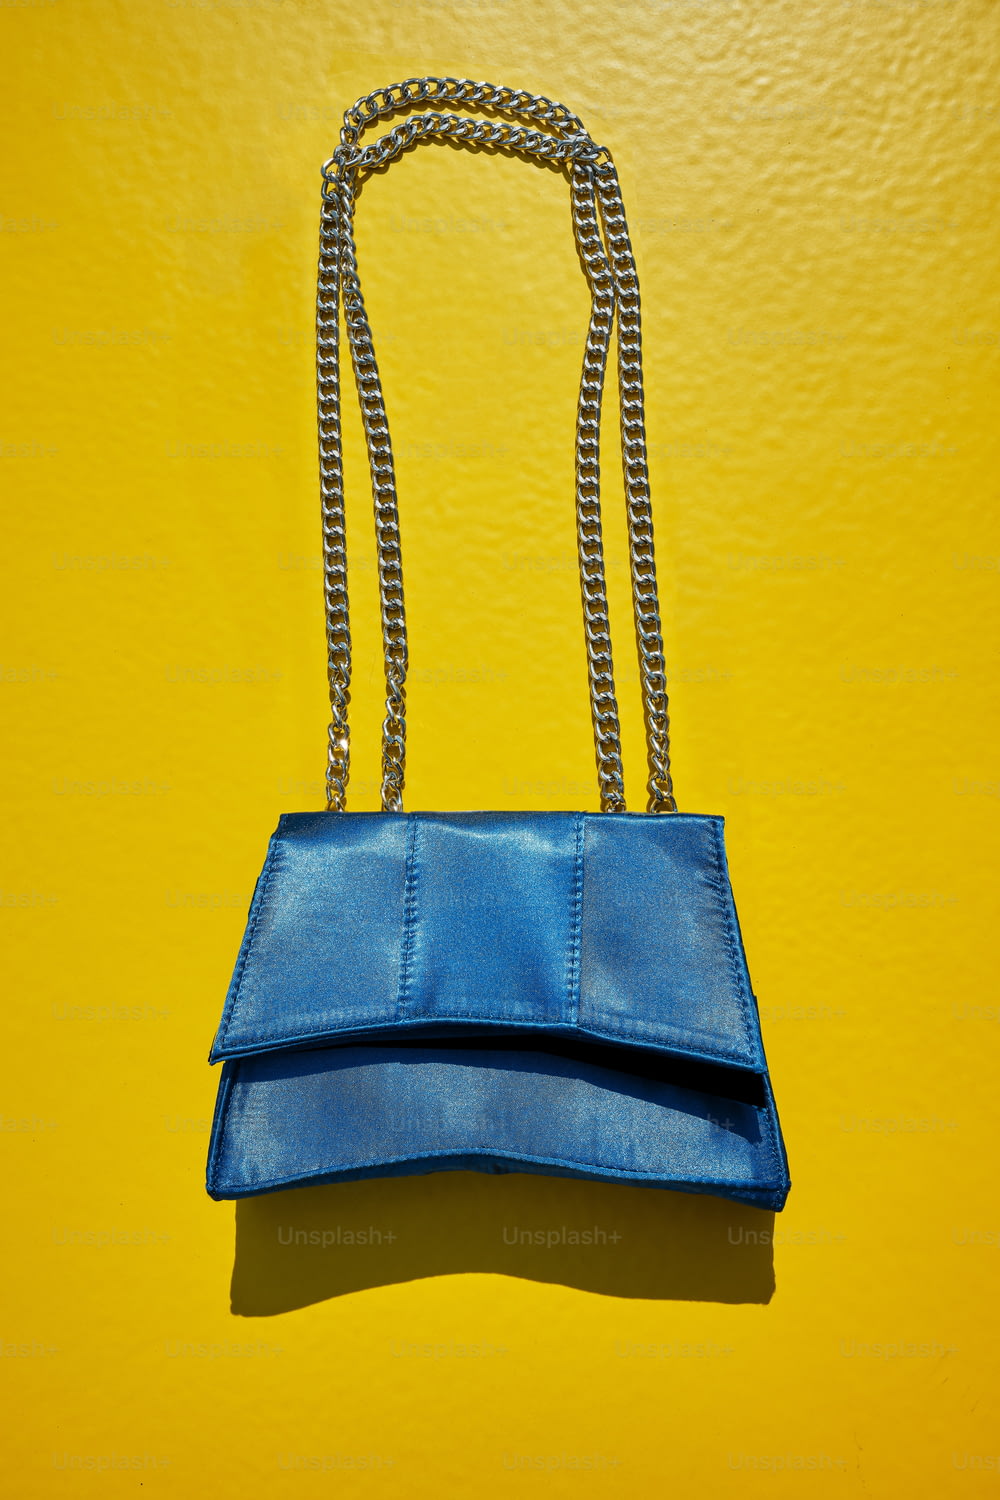 a blue purse hanging on a yellow wall